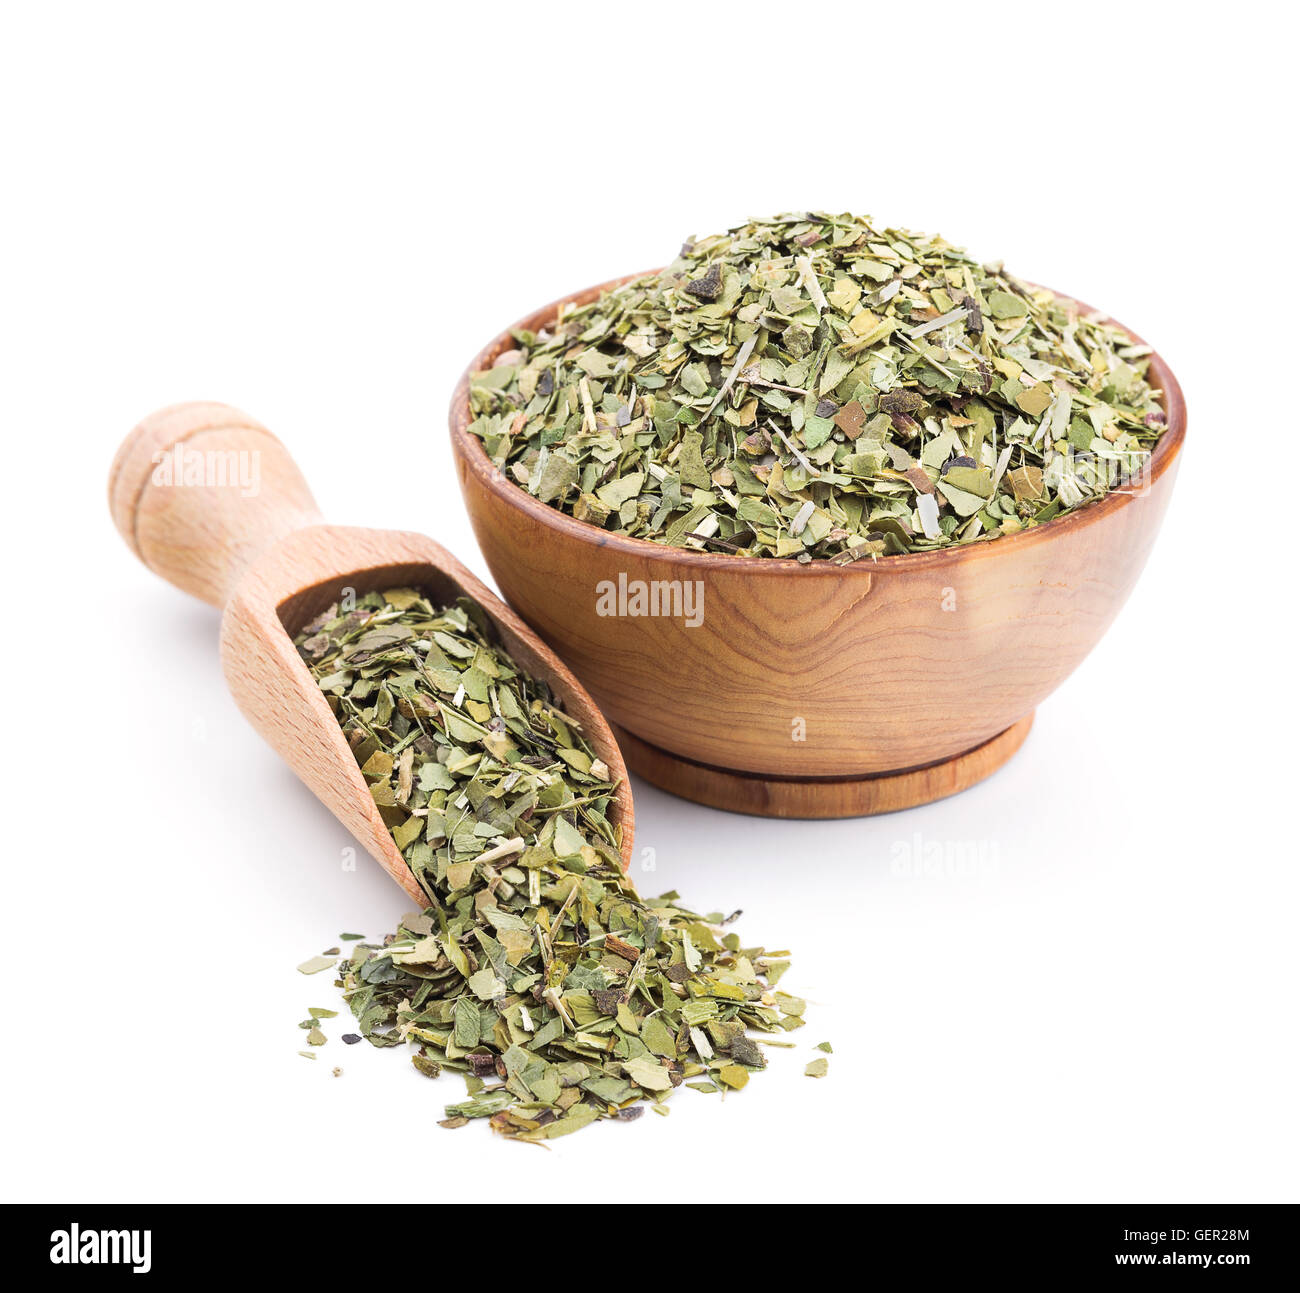 Mate tea in a wooden bowl isolated on white Stock Photo